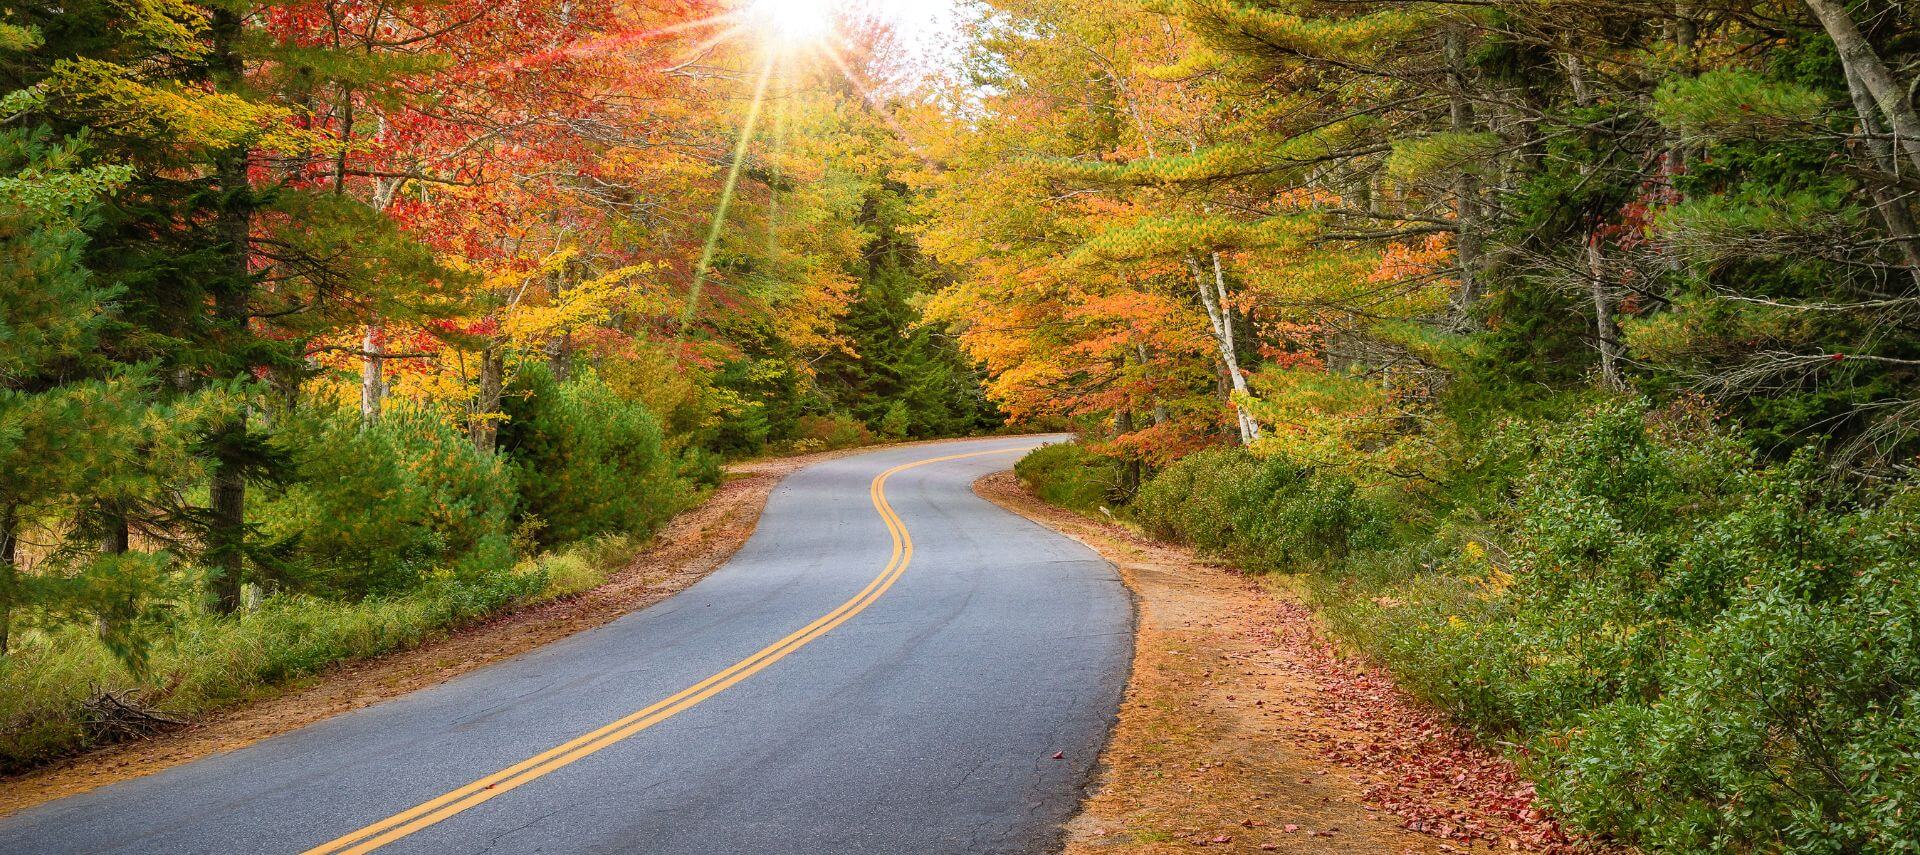 A road winds through a forest with changing fall foliage 